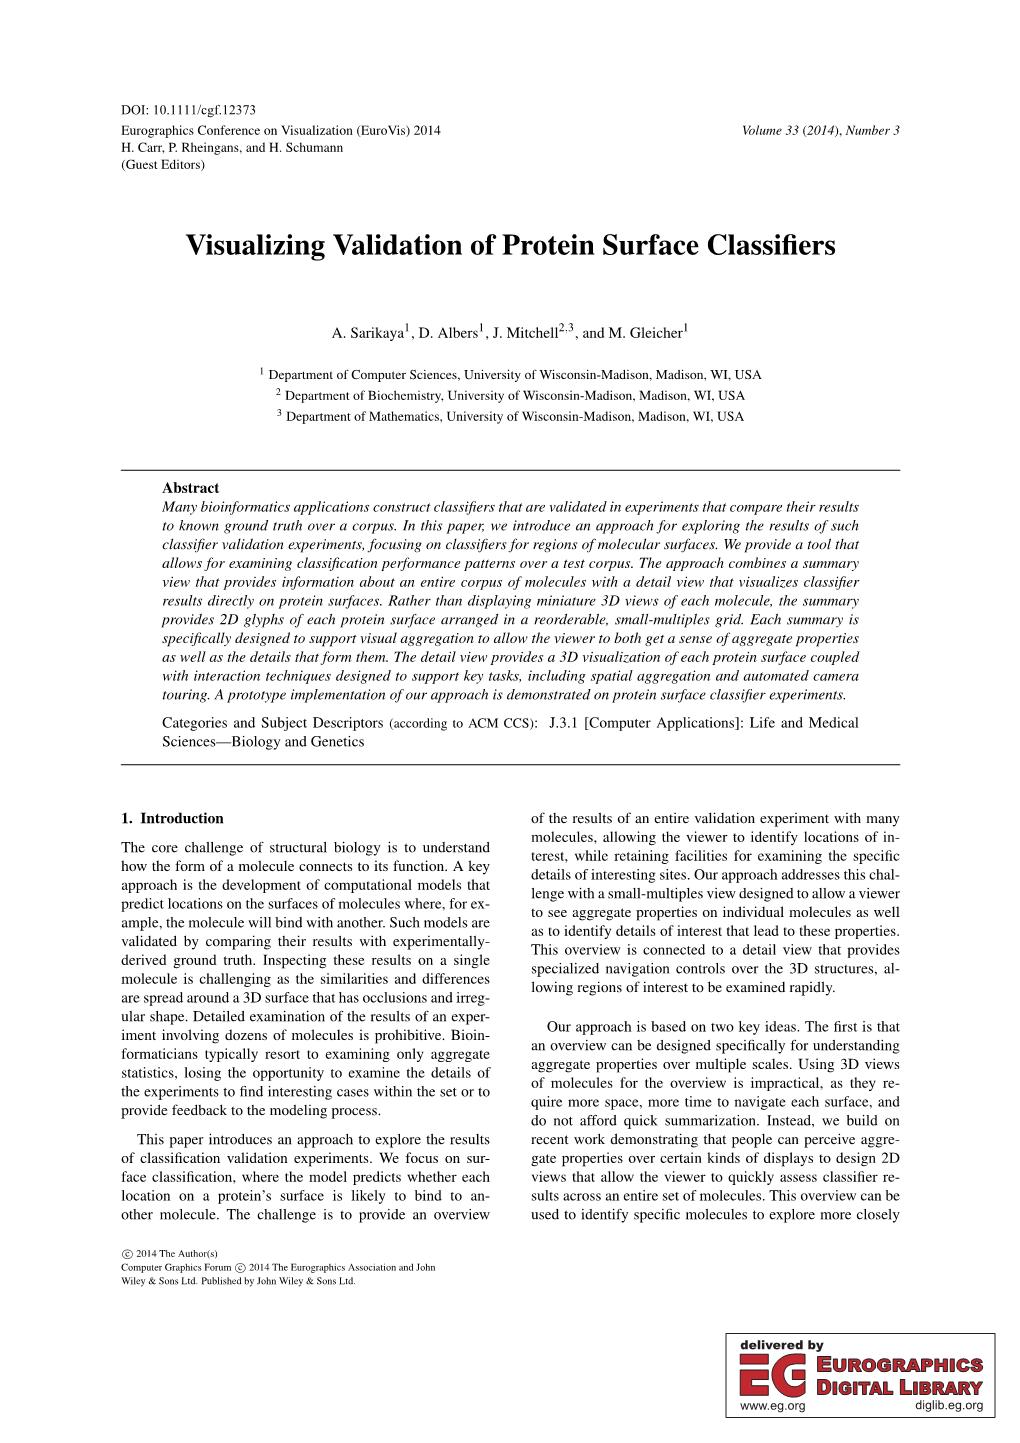 Visualizing Validation of Protein Surface Classifiers